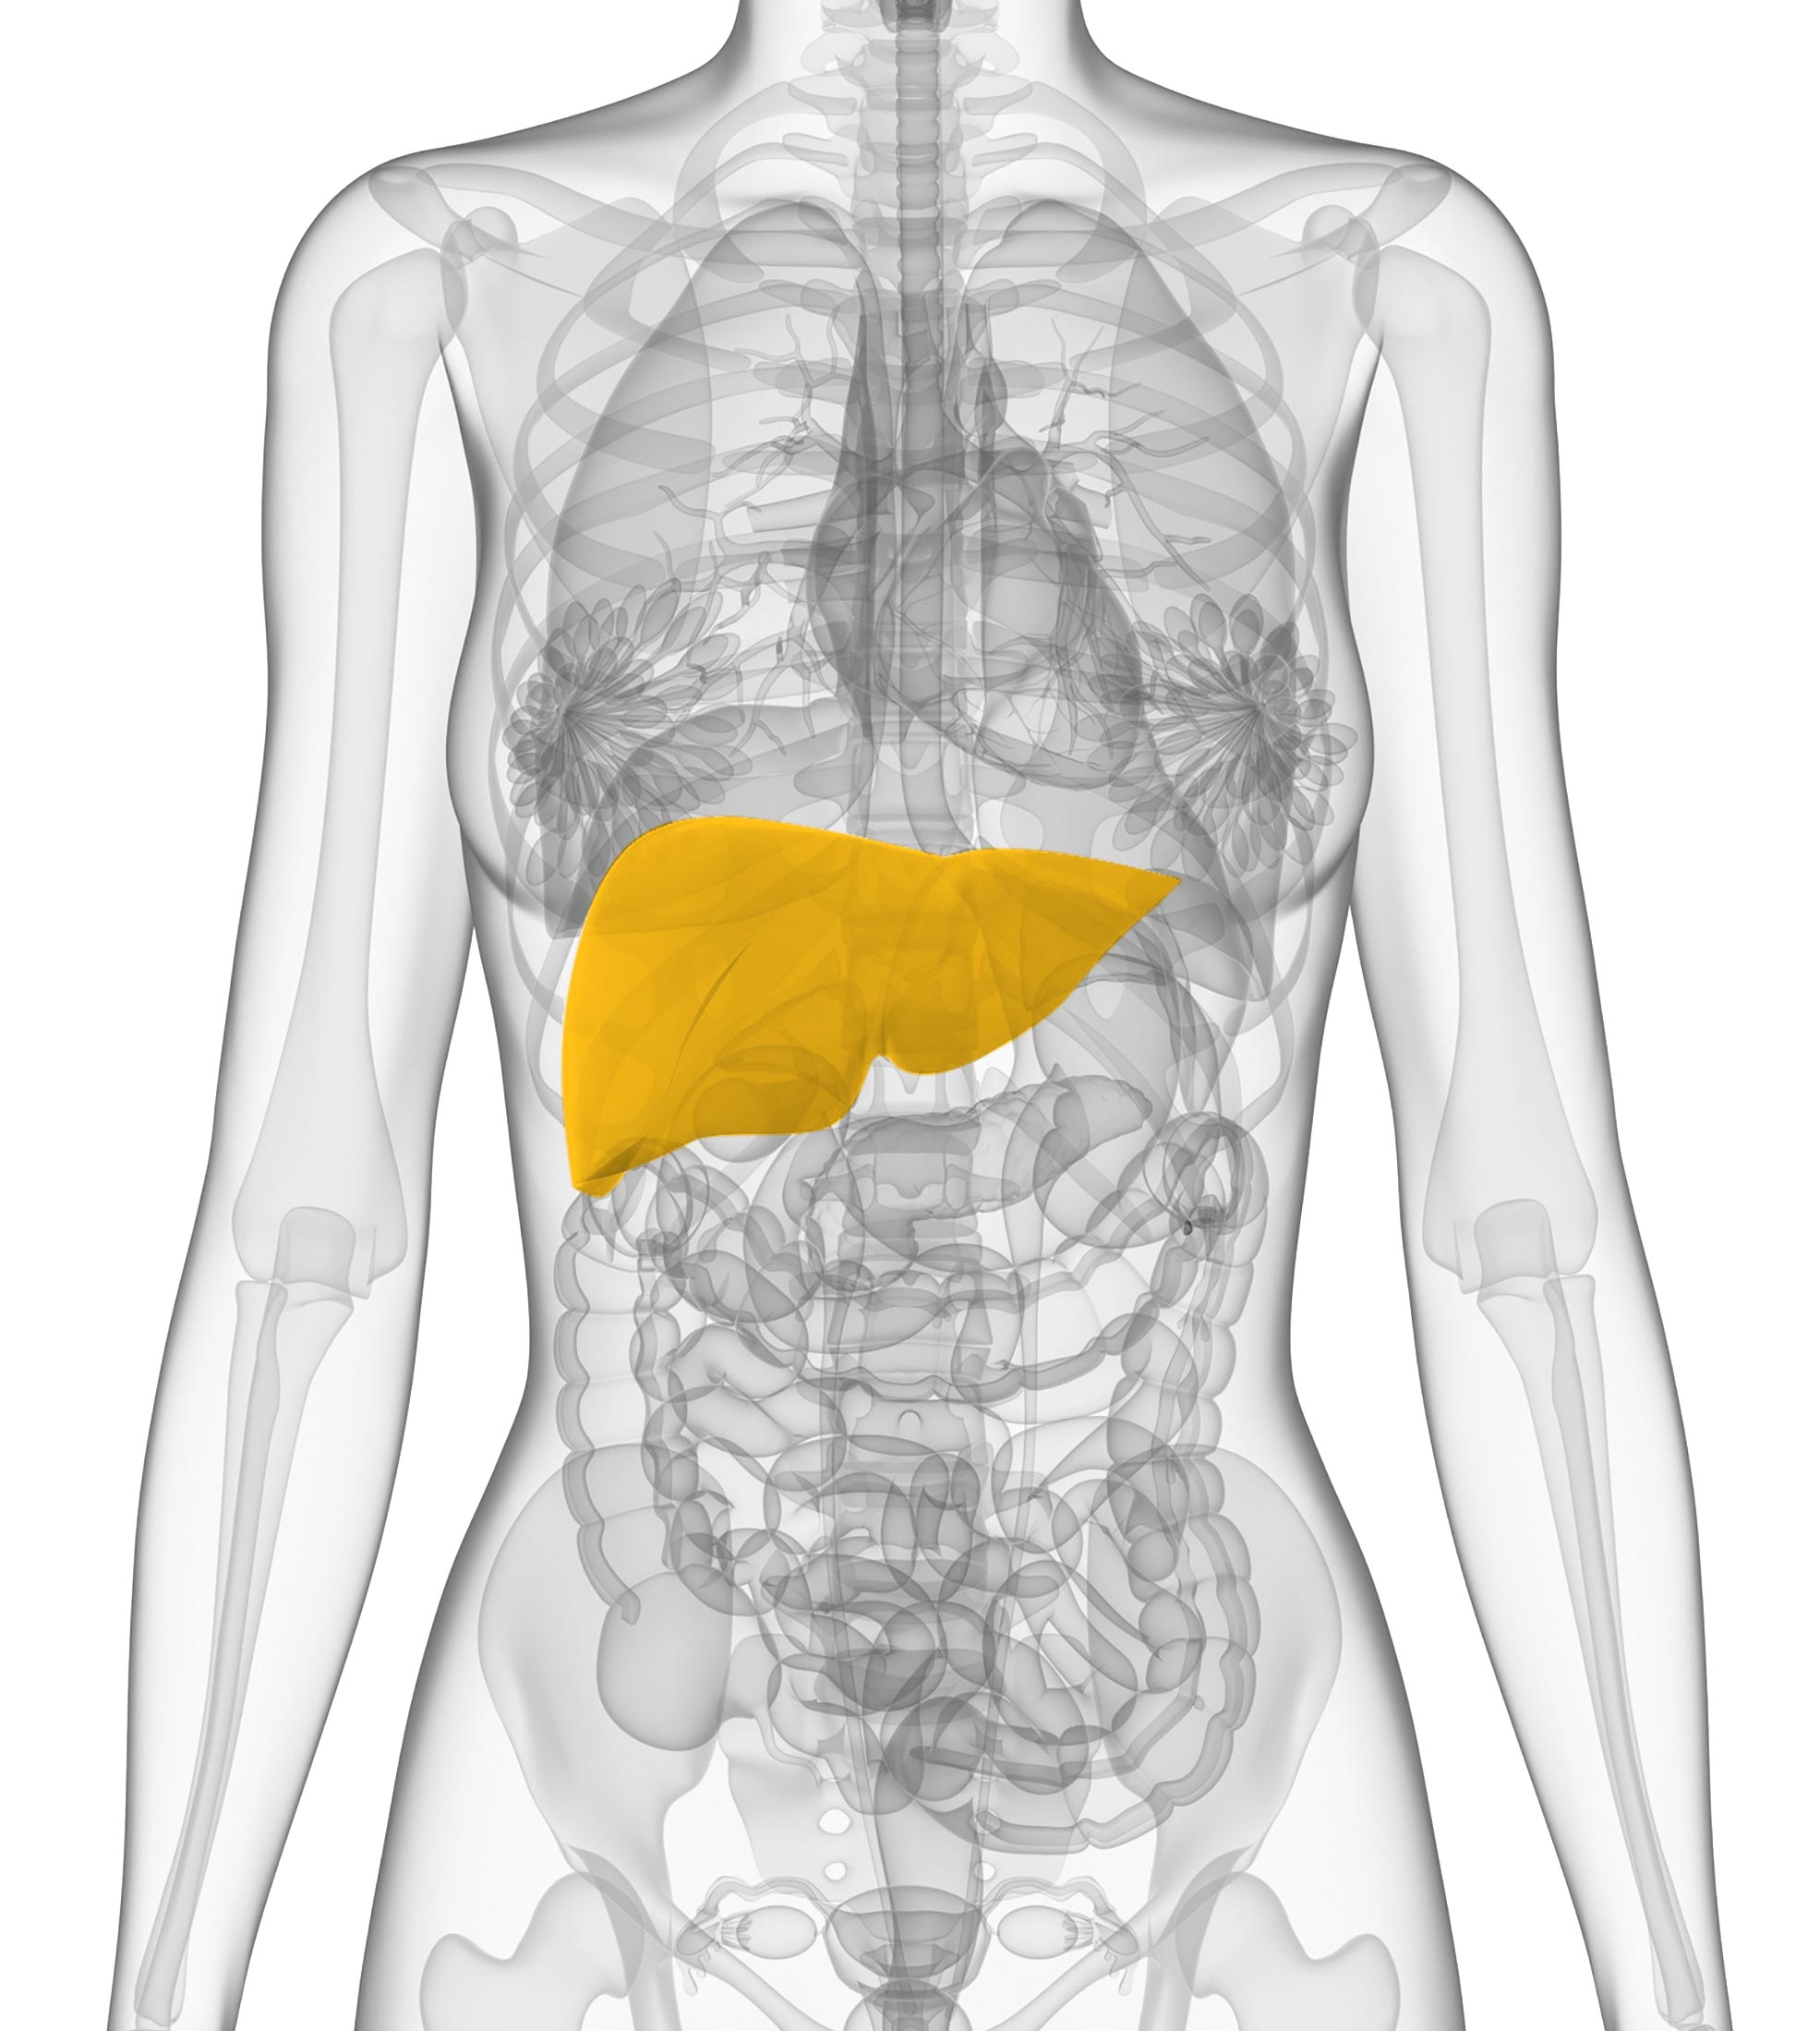 Liver Oncology